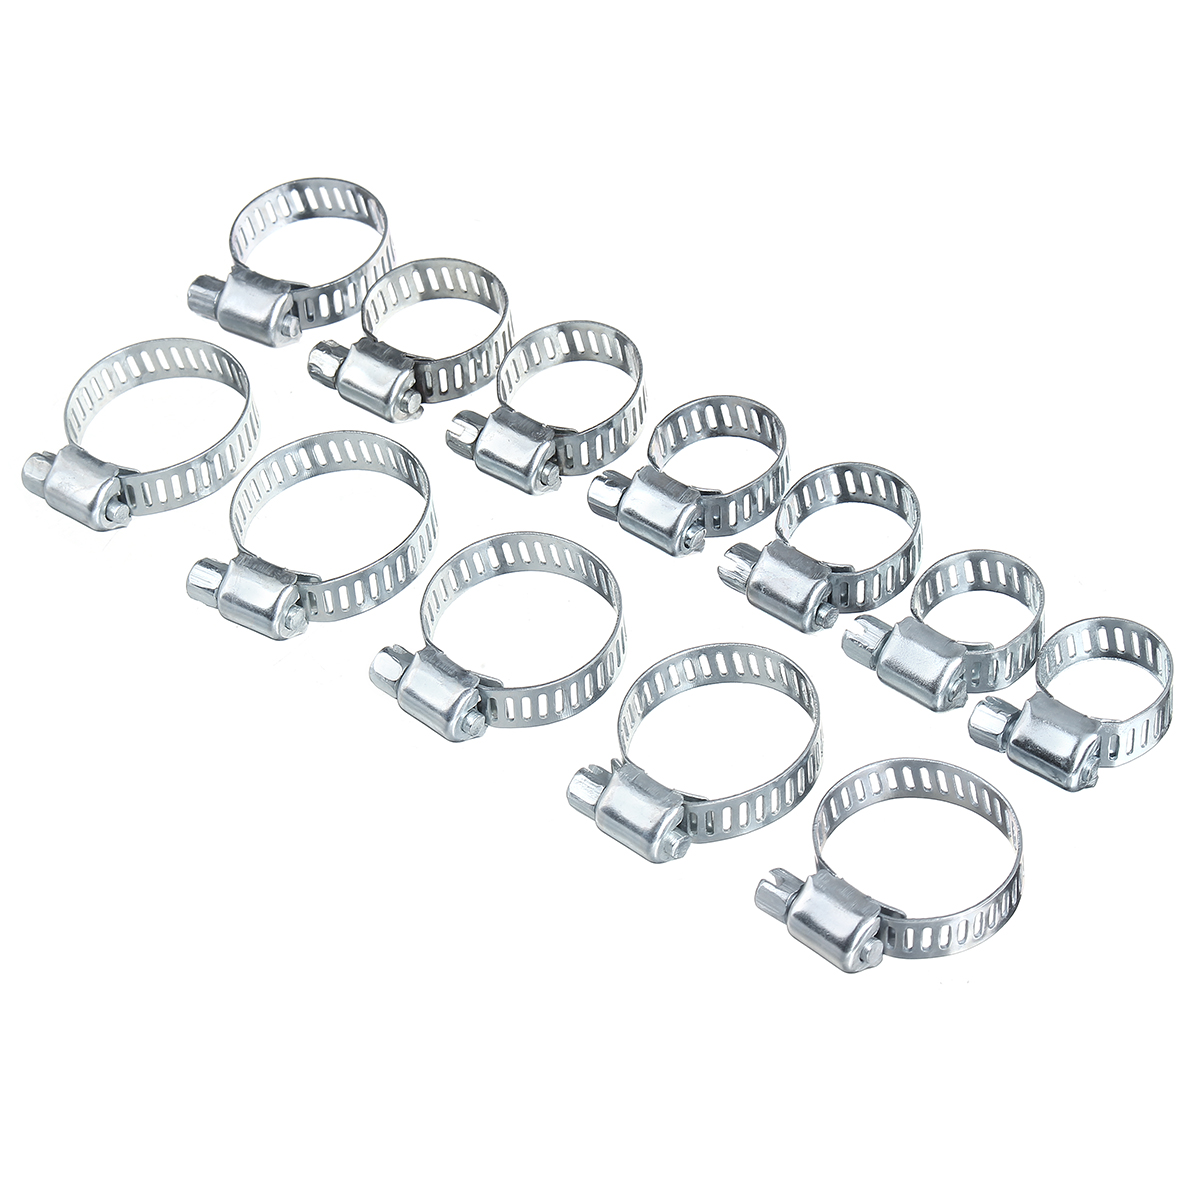 12Pcs-Stainless-Steel-Clip-Fuel-Gas-Water-Hose-Clamp-Worm-Drive-Pipe-Tube-Clips-1629542-1